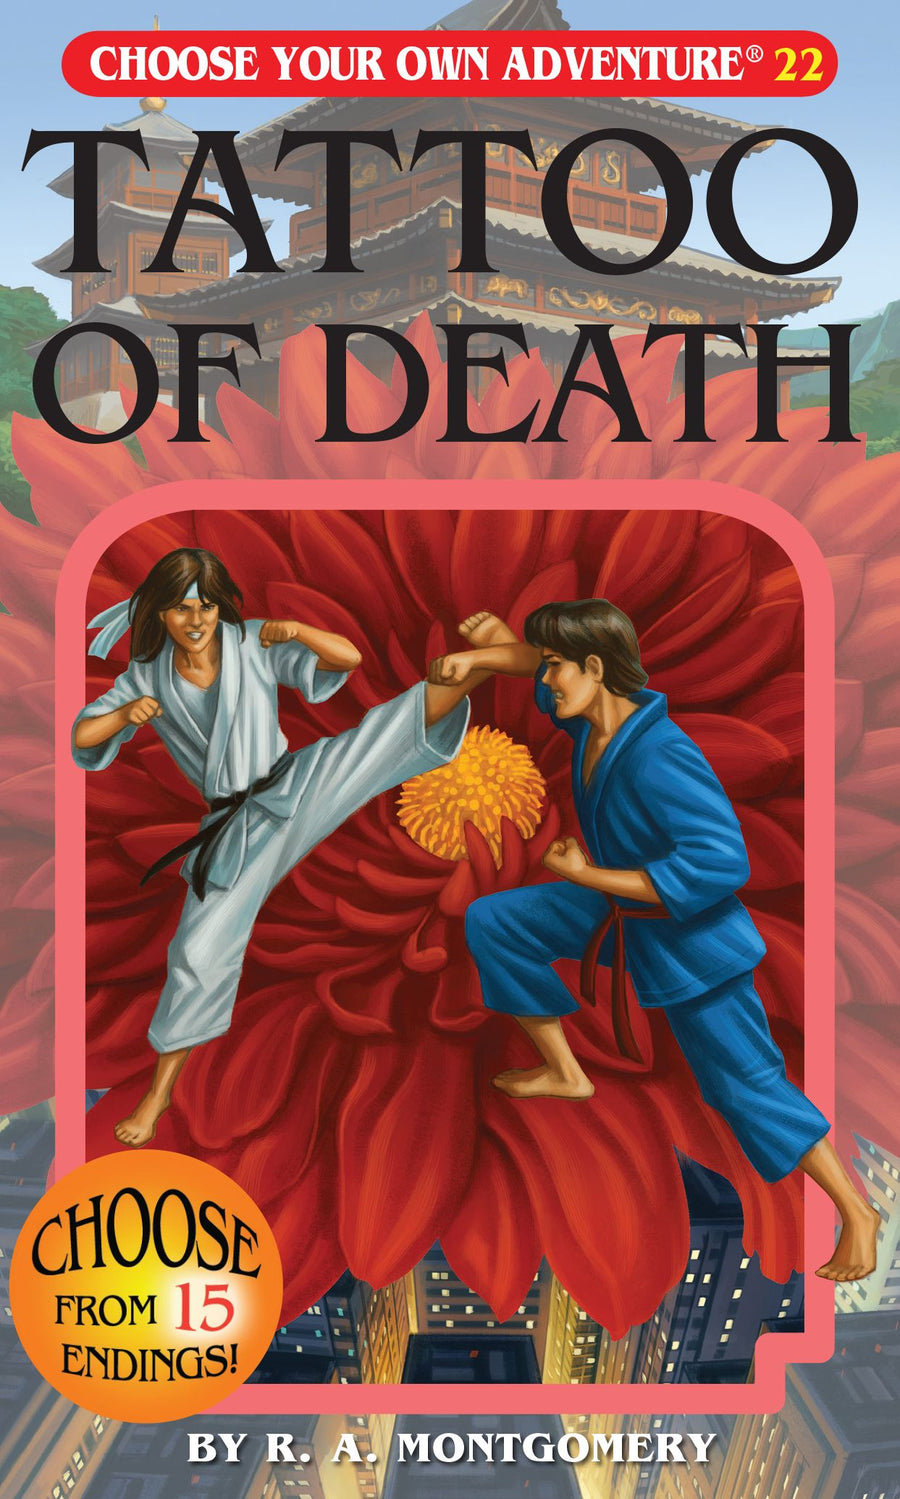 Tattoo of Death Choose Your Own Adventure Book